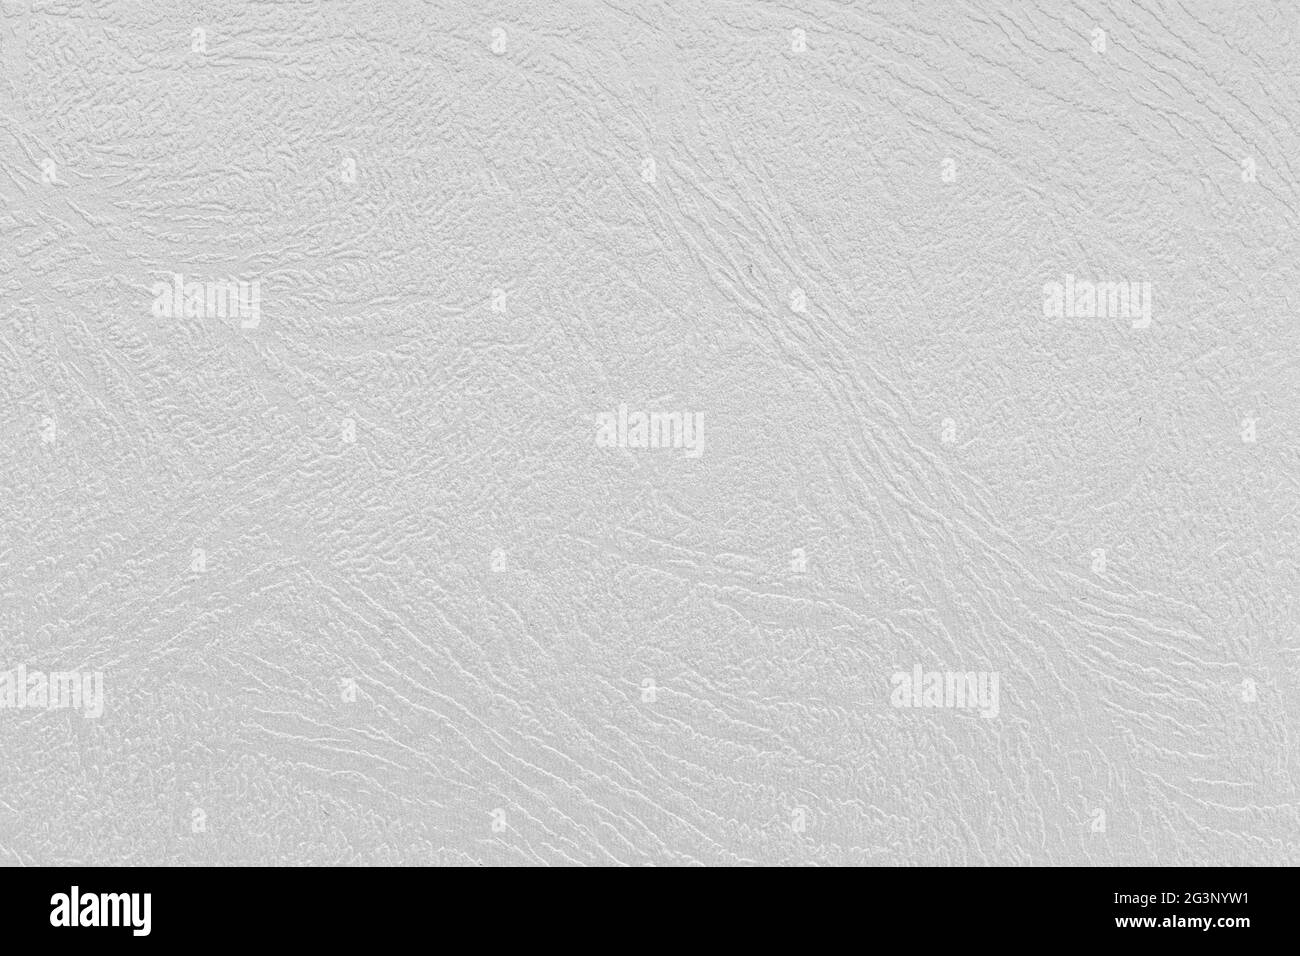 Light gray textured abstract background. Wrinkled texture paper sheet Stock Photo